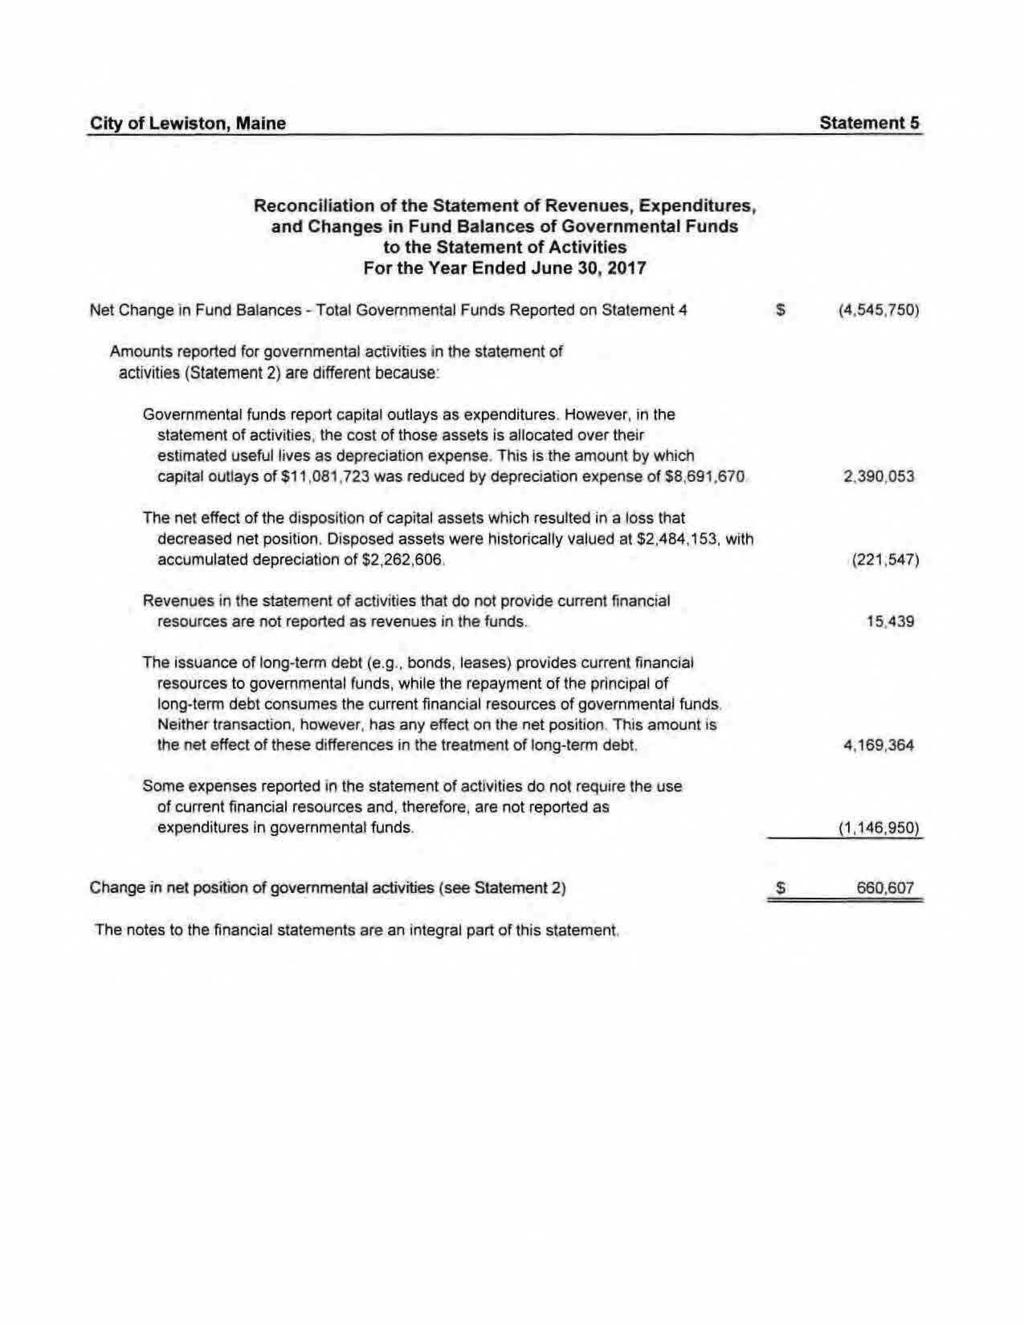 City of Lewiston, Maine Statement 5 ReconciHafion of the Statement of Revenues, Expenditures, and Changes in Fund Balances of Governmental funds to the Statement of Activities For the Year Ended J~ne